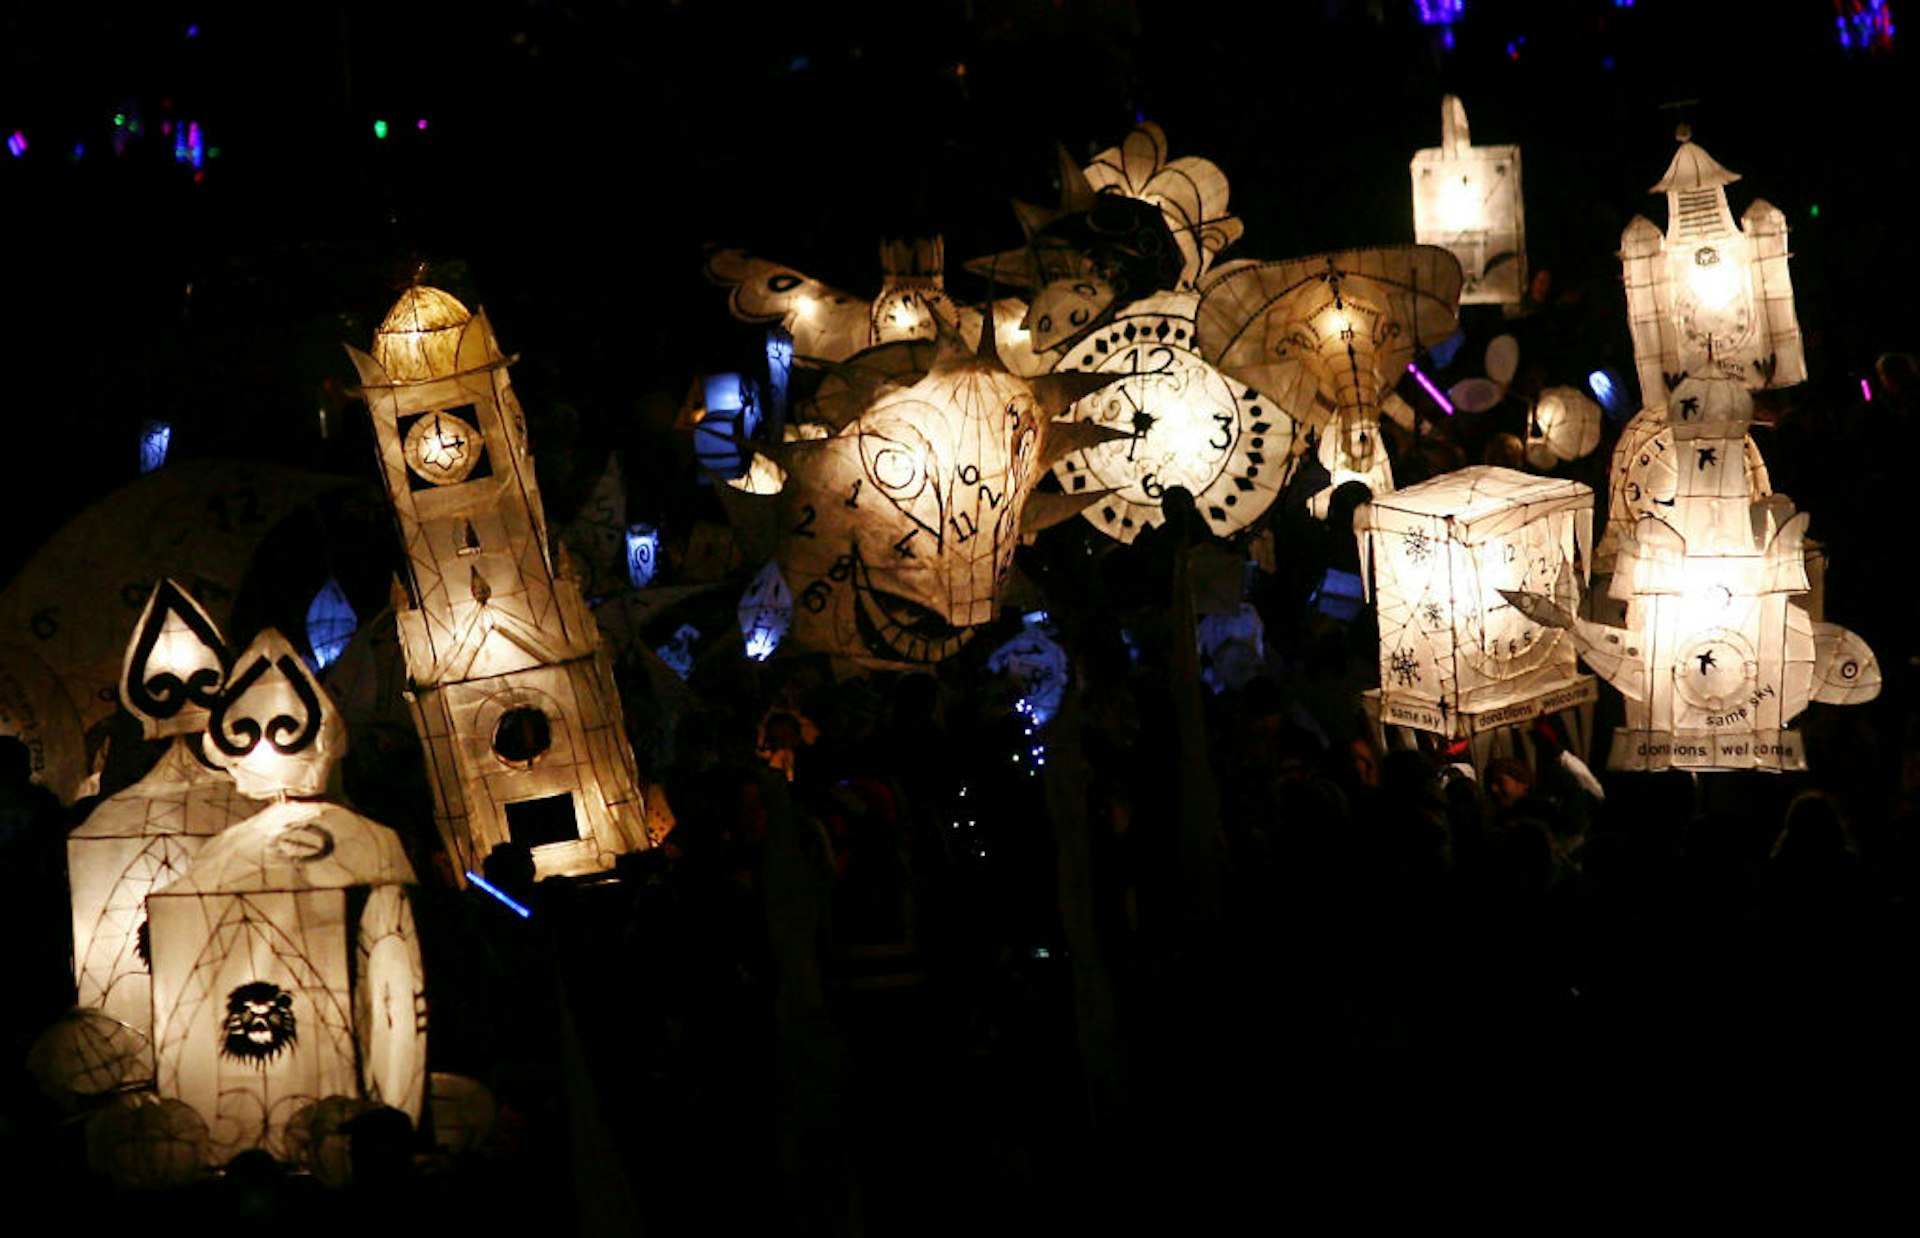 The Burning the Clocks parade of lanterns moves through Brighton in East Sussex as part of celebration of the winter solstice.  